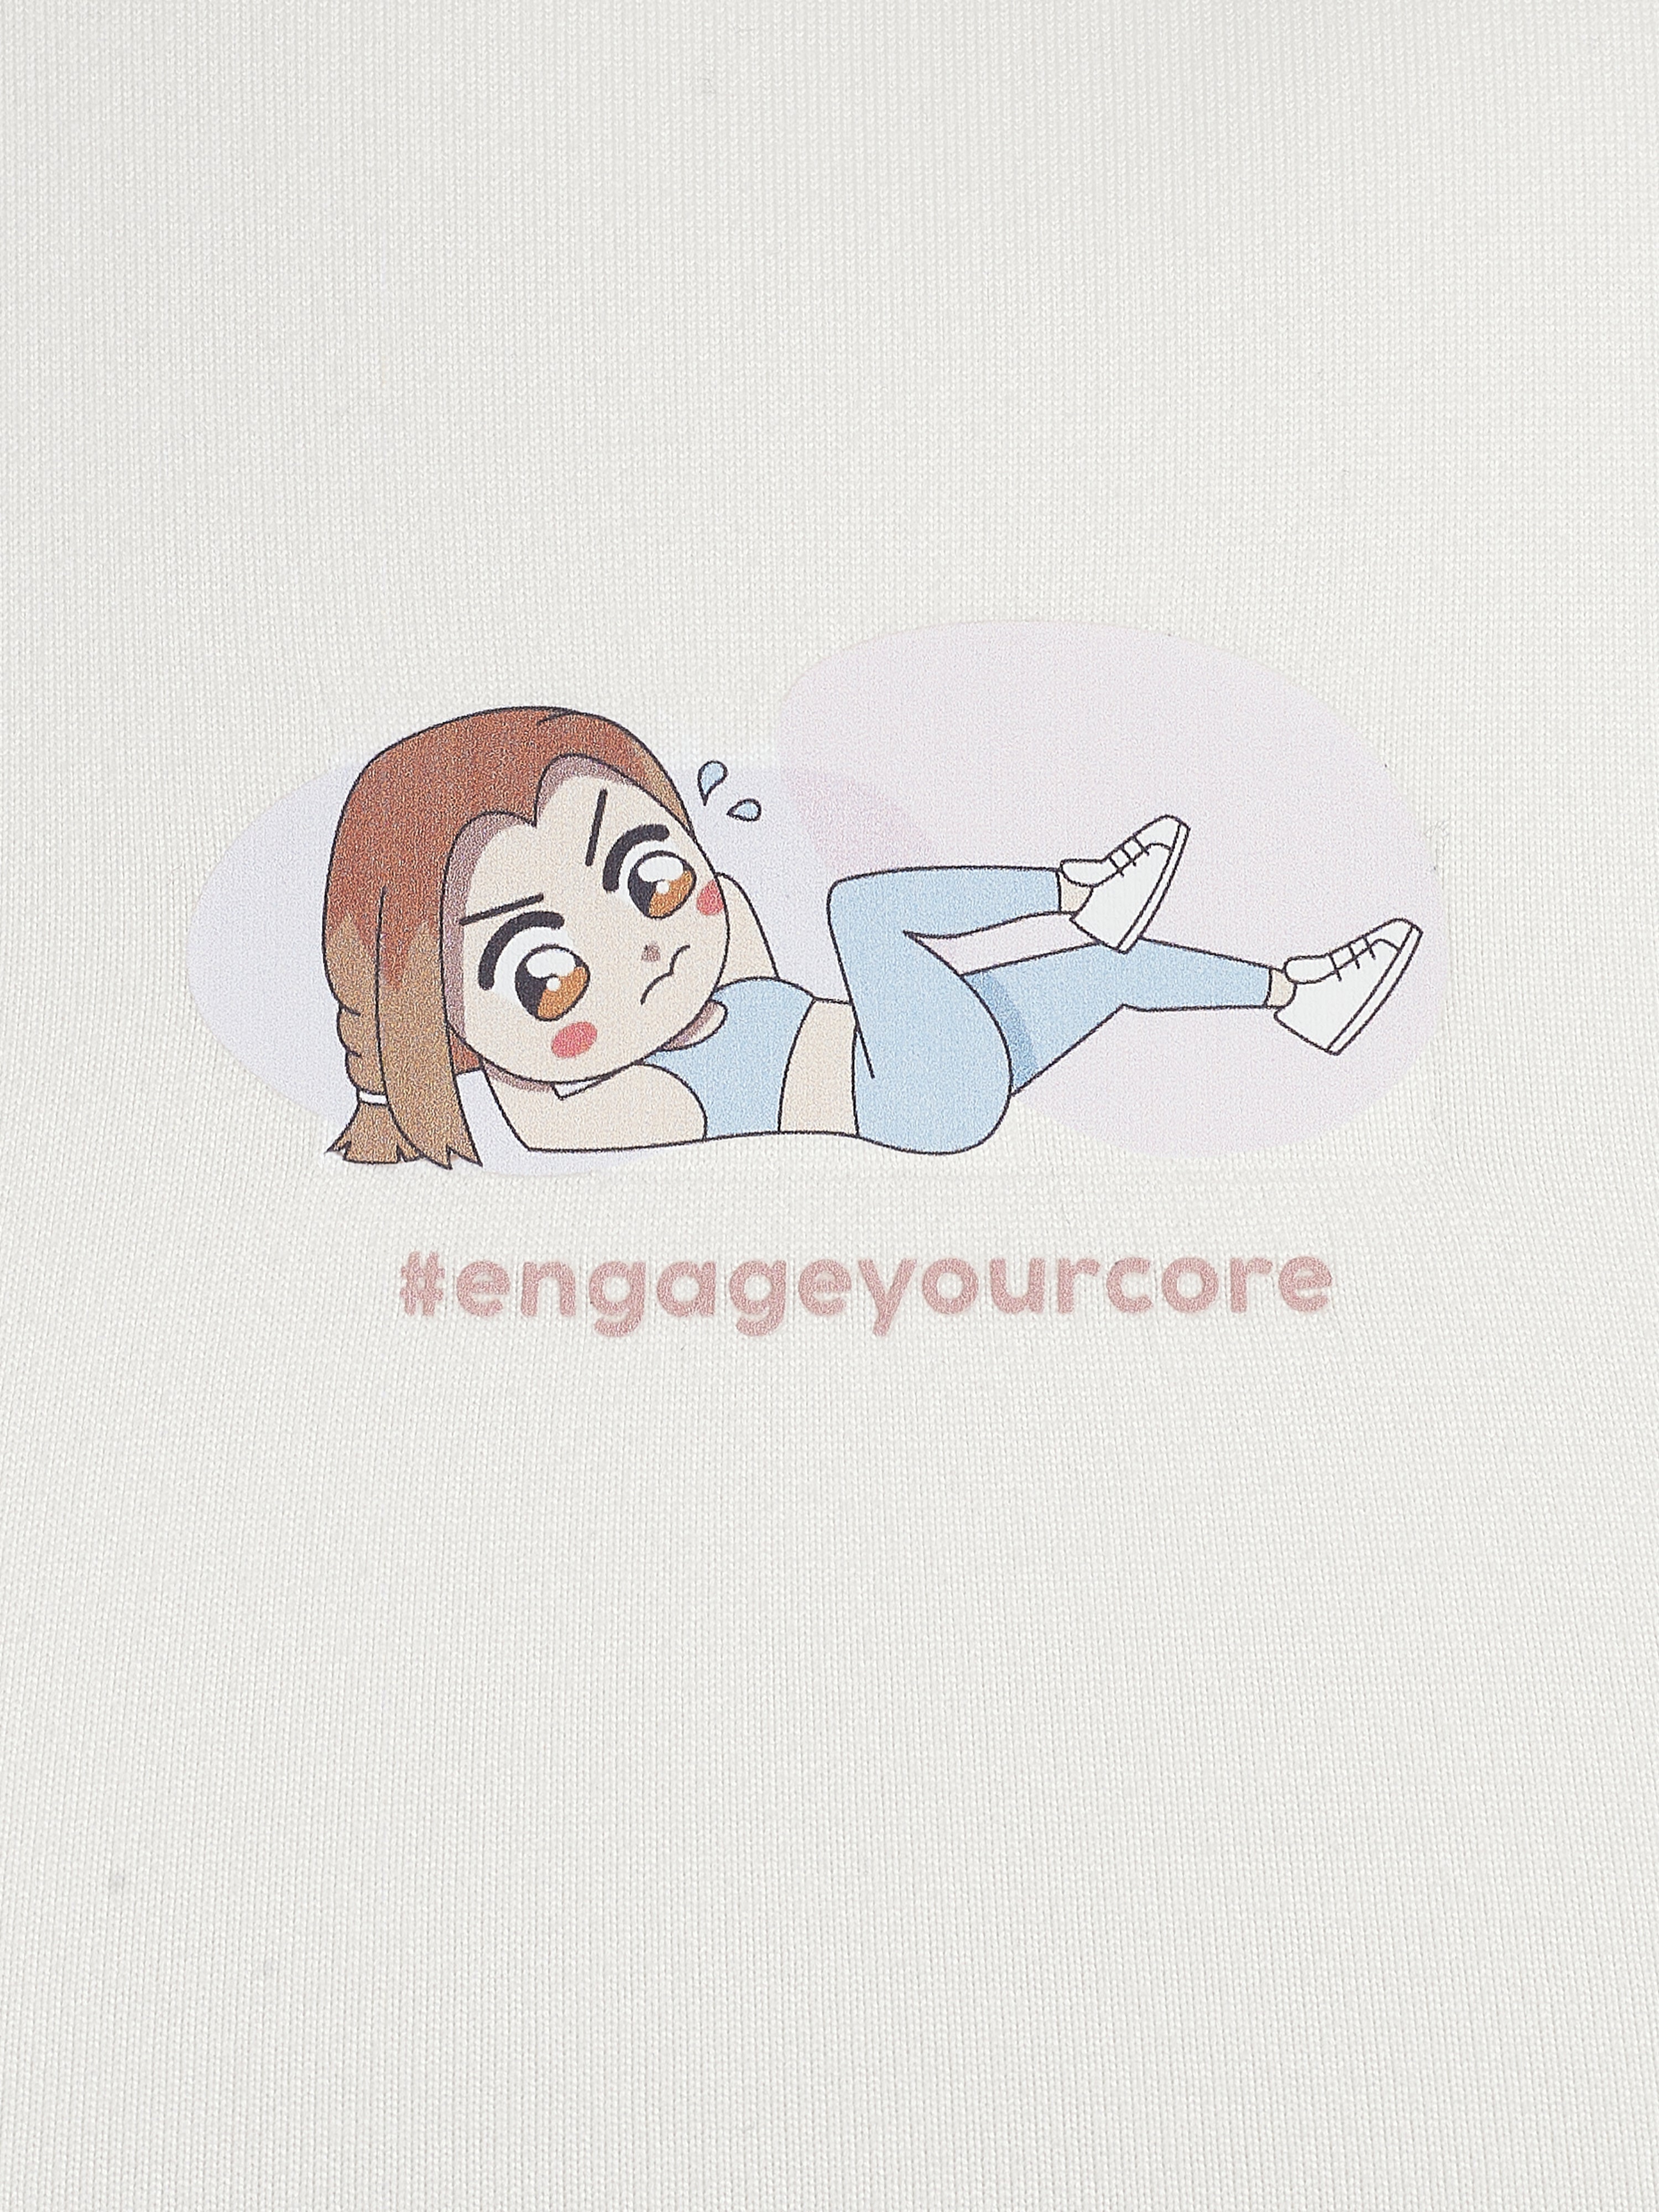 Cream Crop Top - Engage Your Core